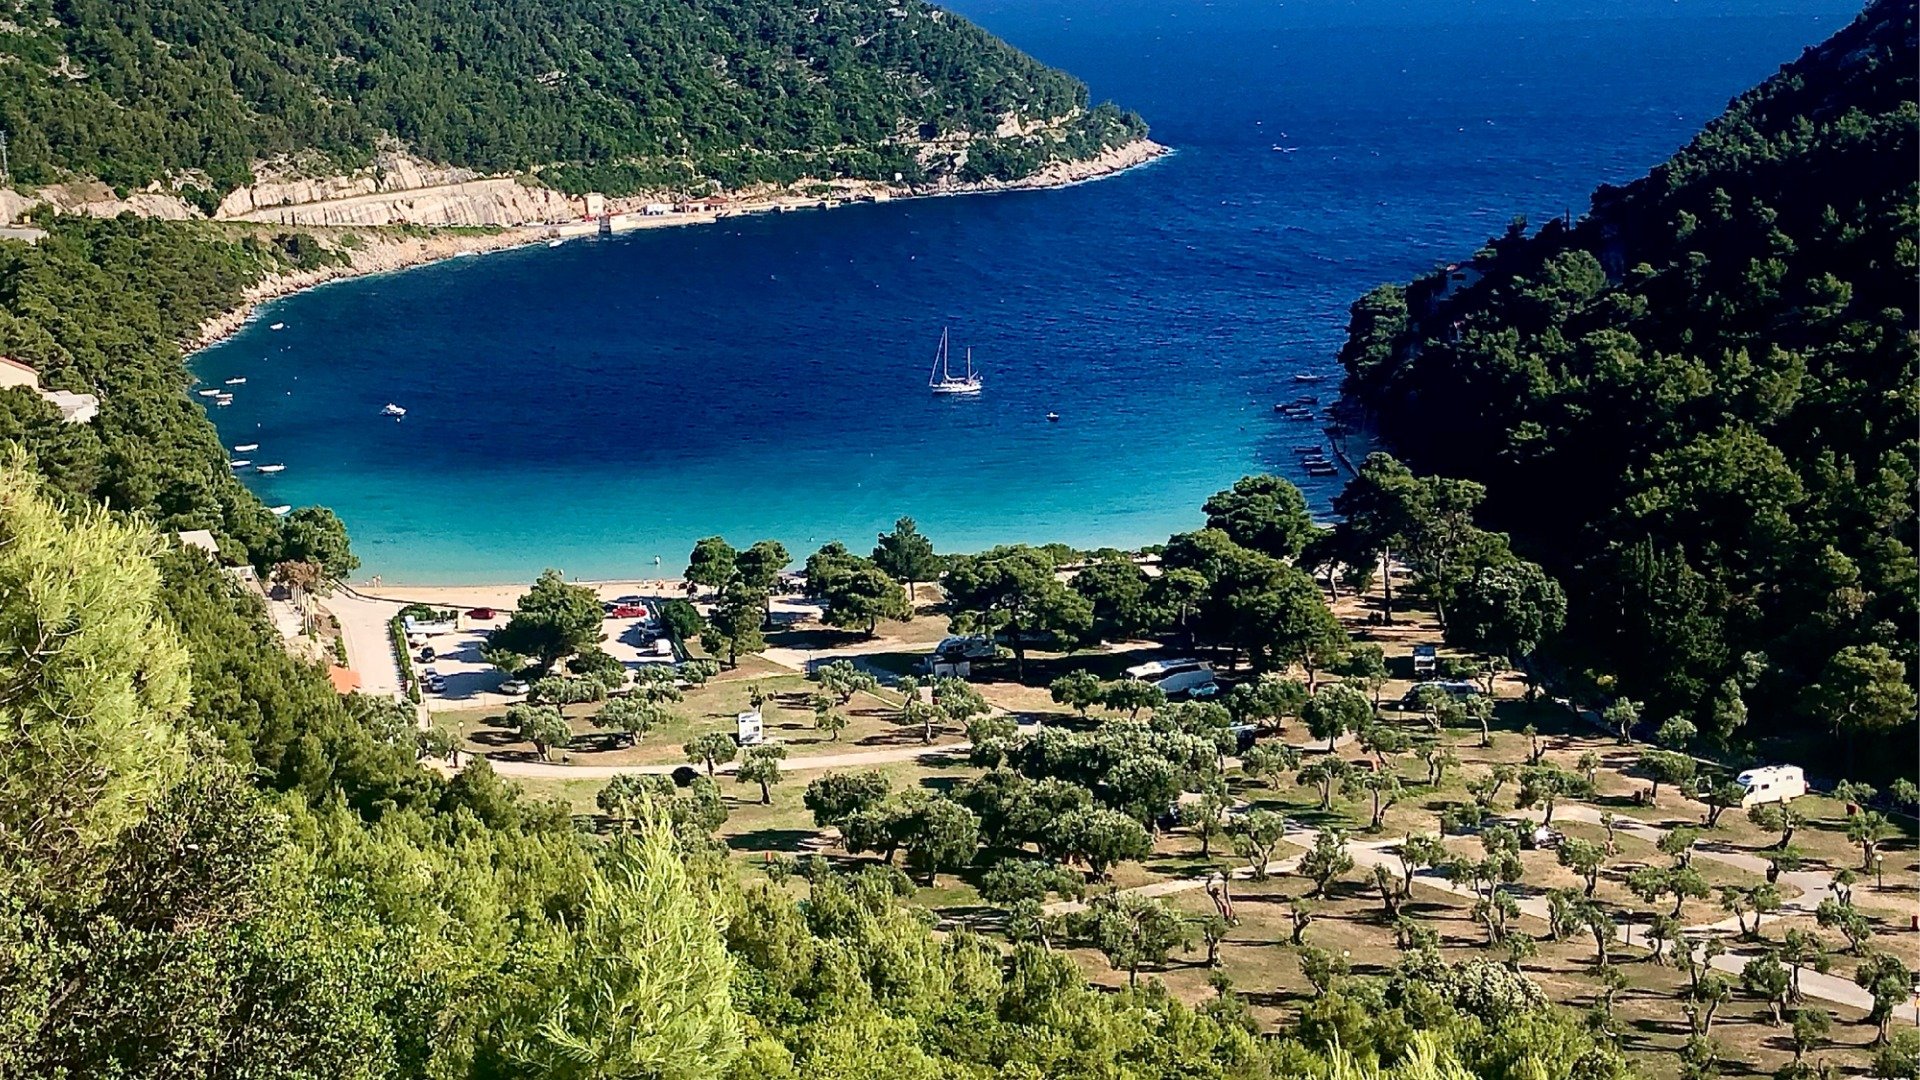 This is a panoramic view of Prapratno Bay, one of the best Croatia beaches. The sea water is turquoise near the beach but becomes deep blue the farther off the shore you go. 